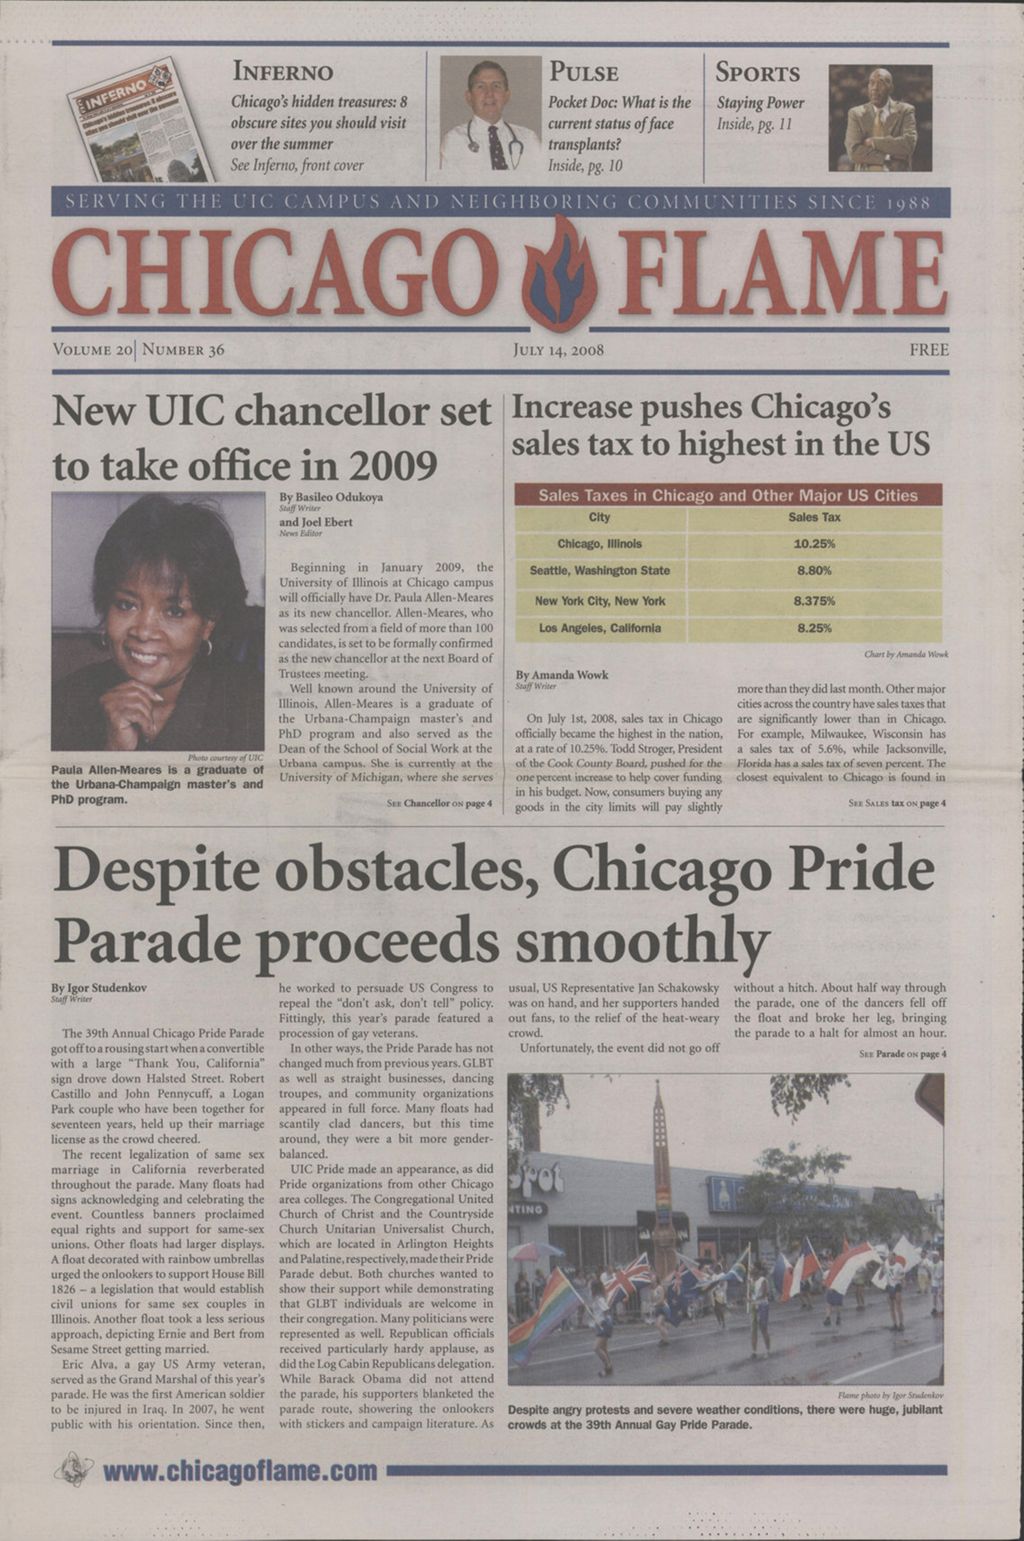 Chicago Flame (July 14, 2008)